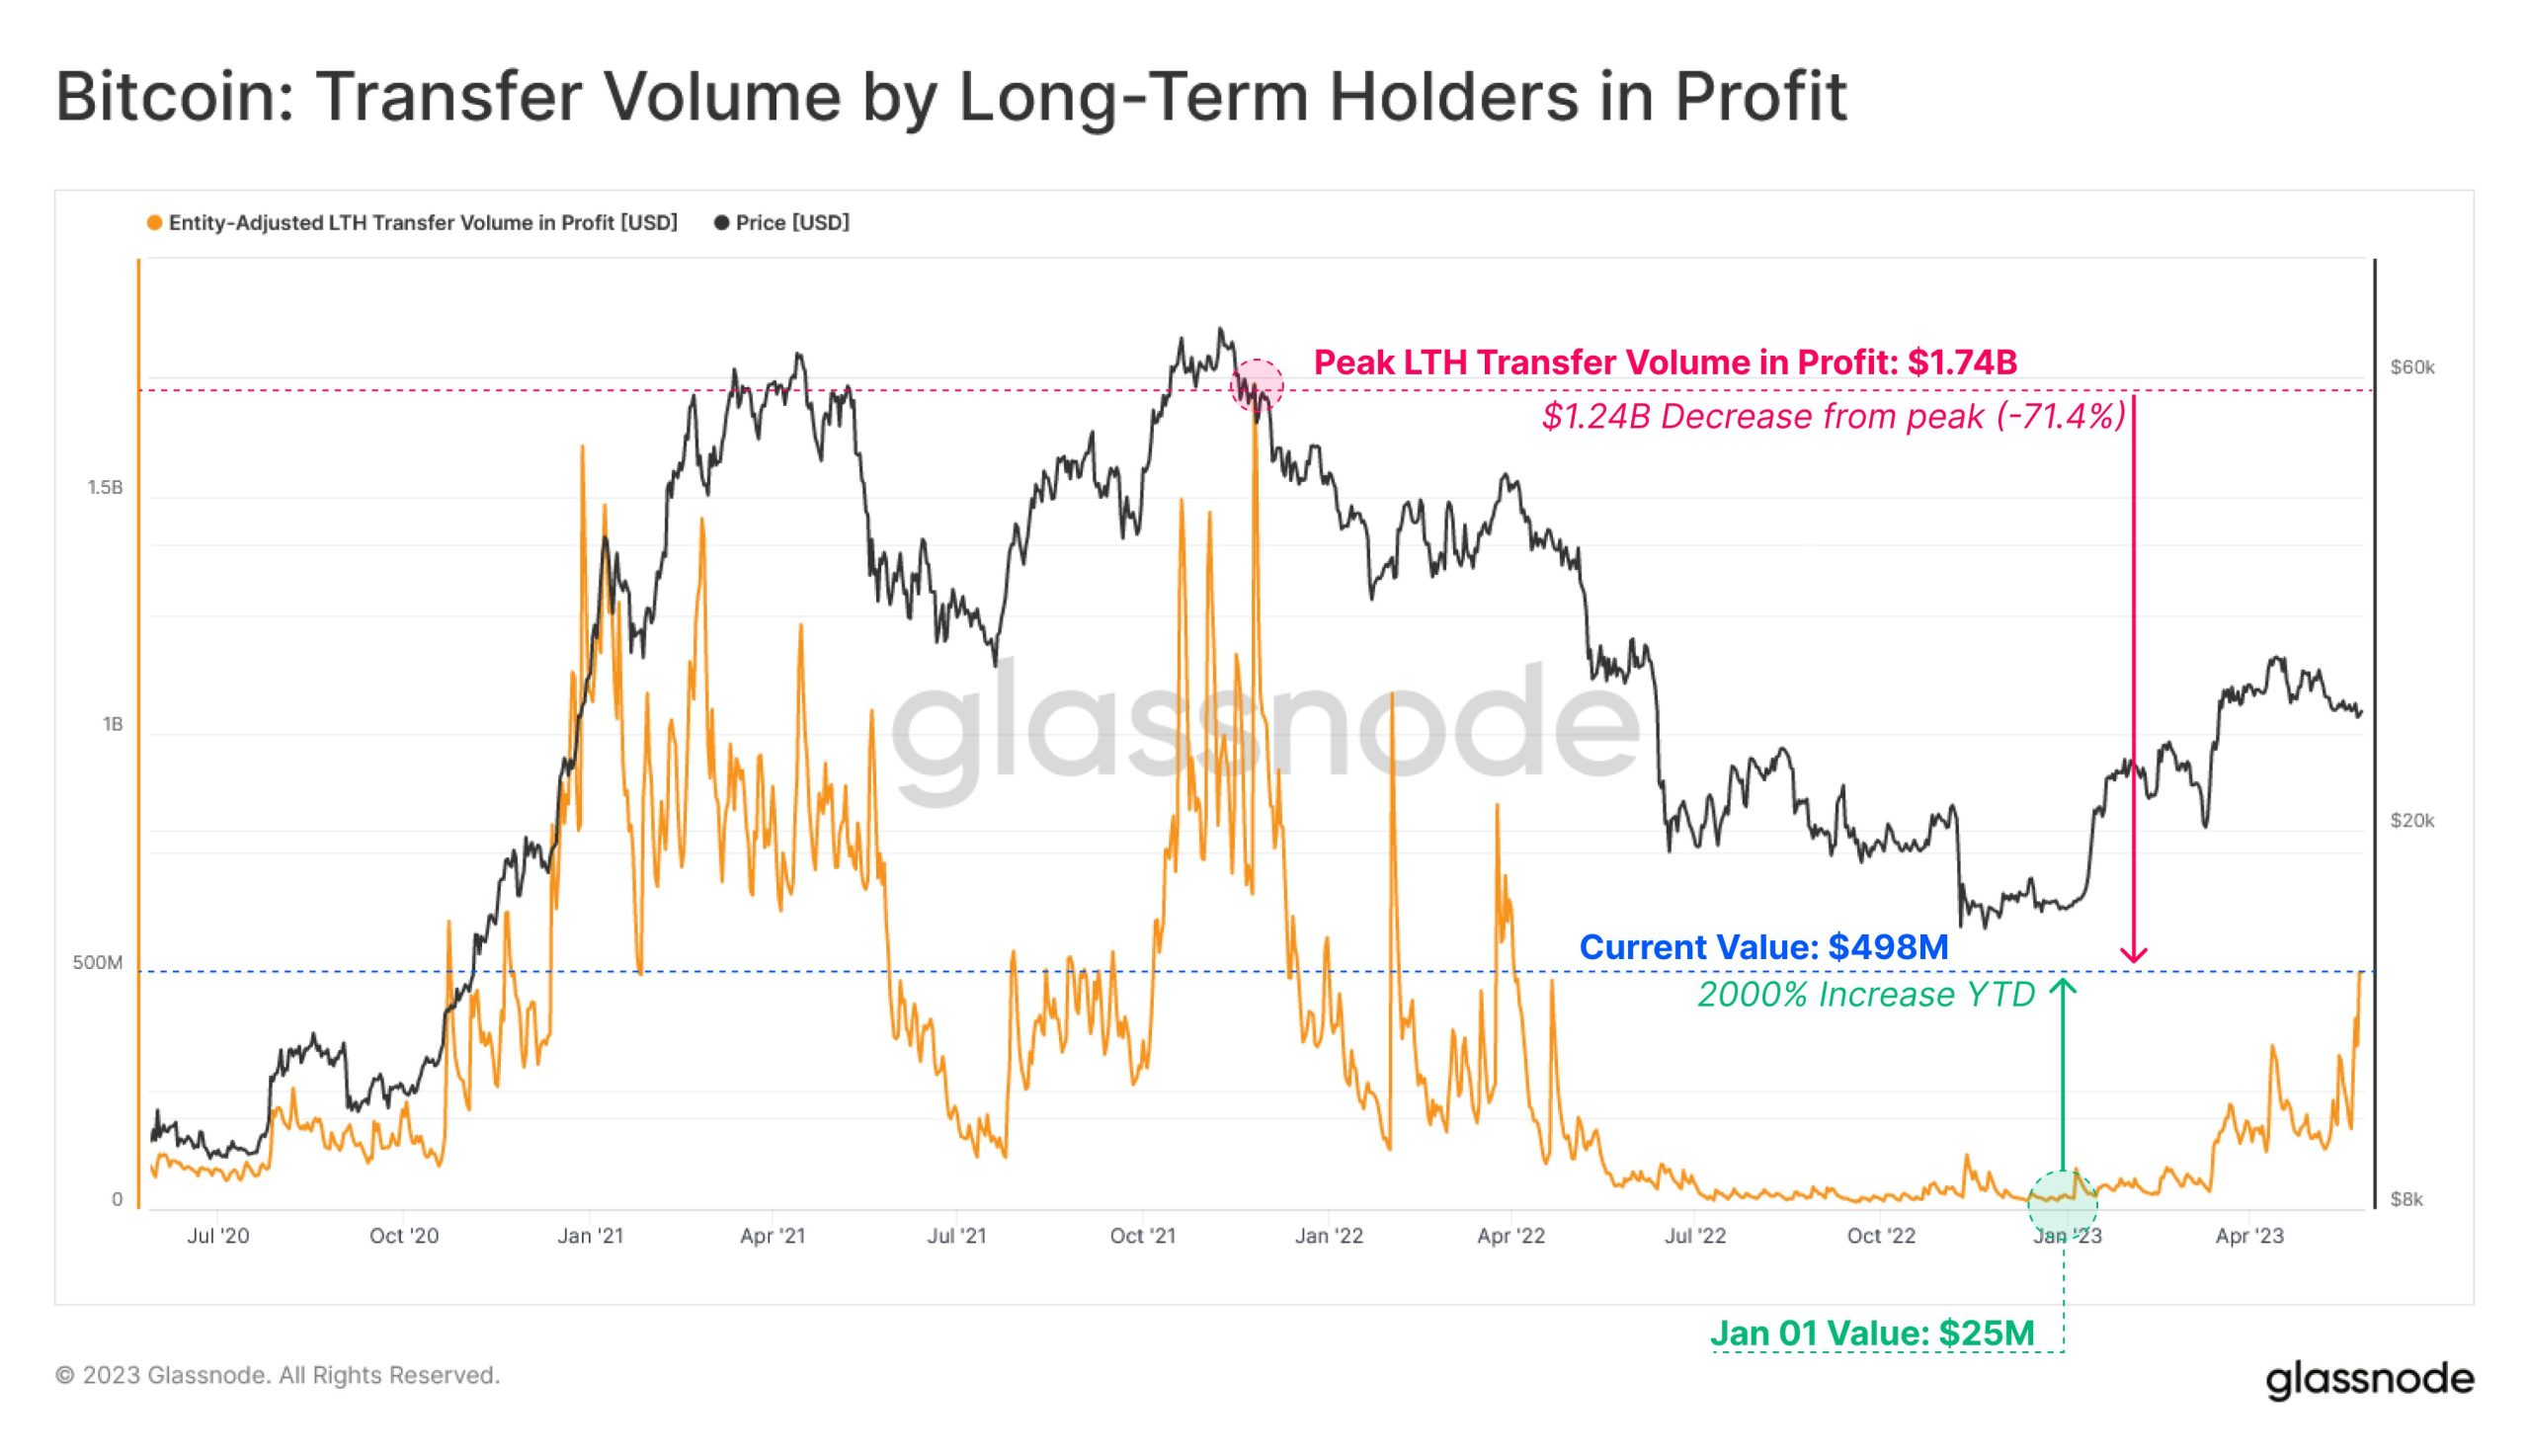 Glassnode chart showing volume of long-term holders in profit.